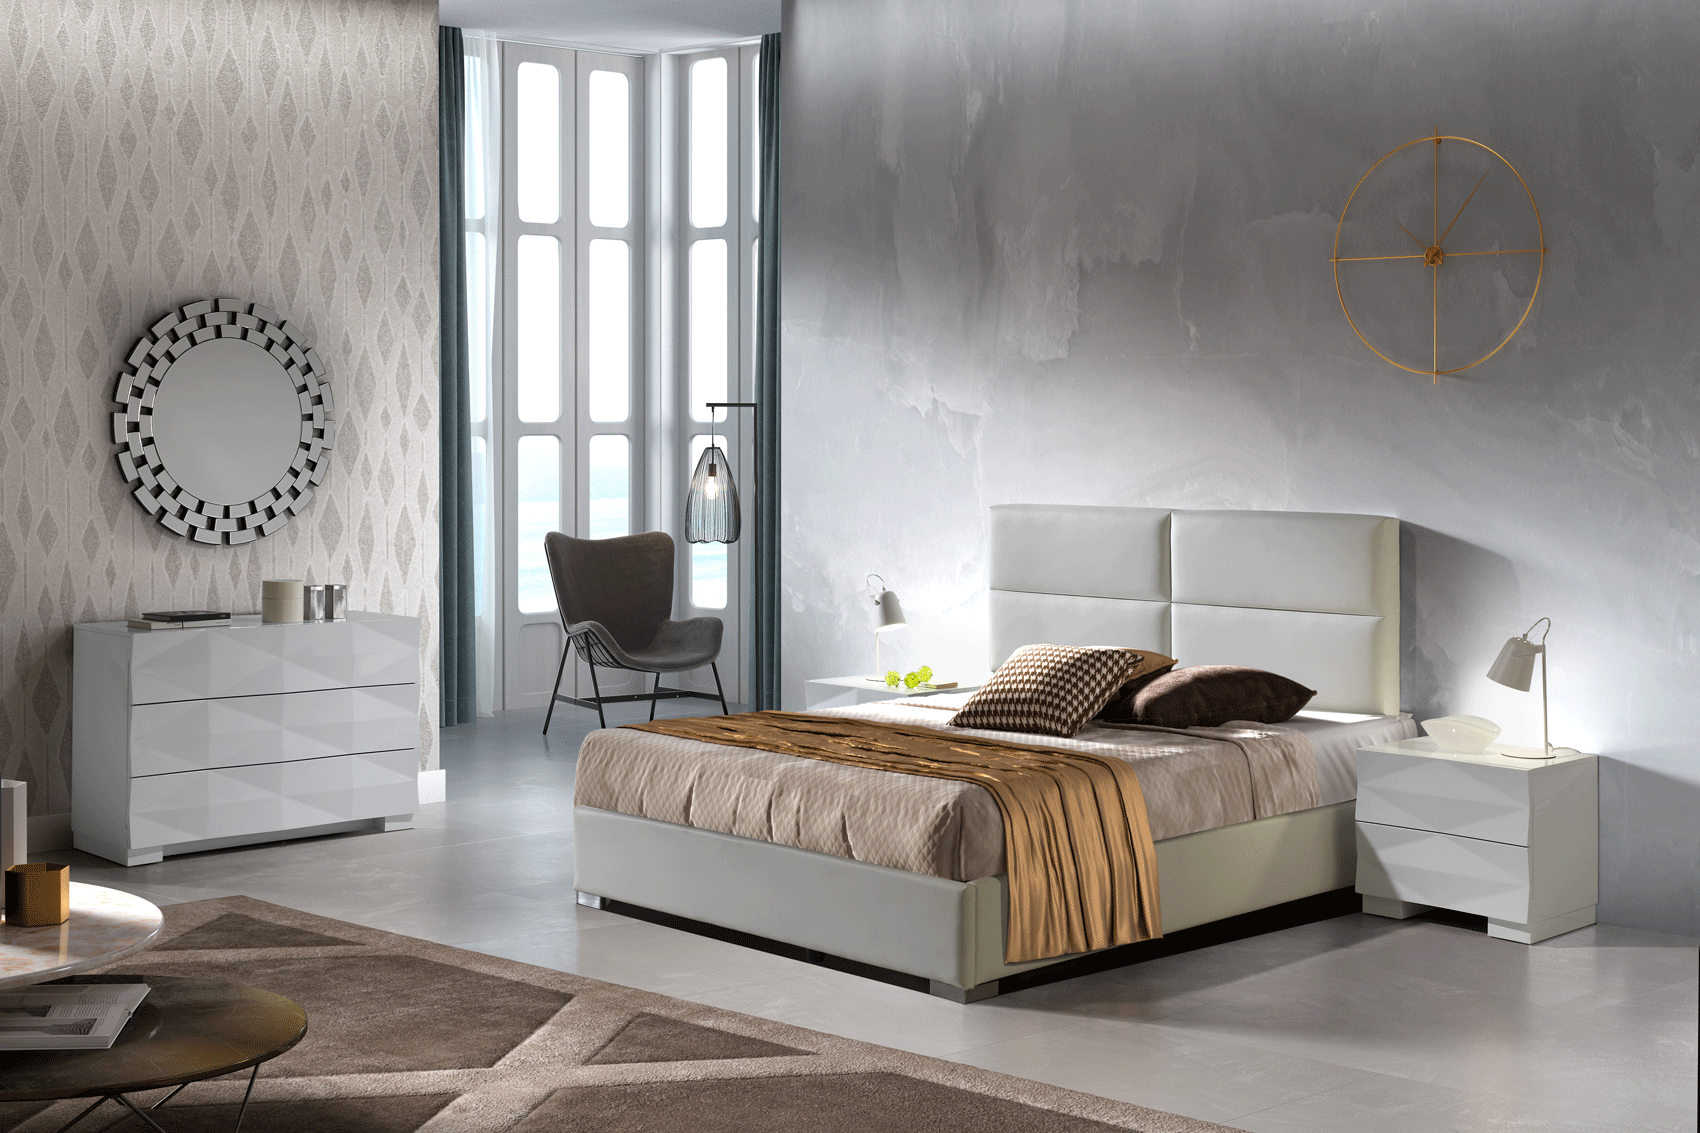 Bedroom Furniture Beds with storage 851 Sara Bed with Storage, M-100, C-100, E-418, DC-508, FL-15011-NBK, LT-3538-W1